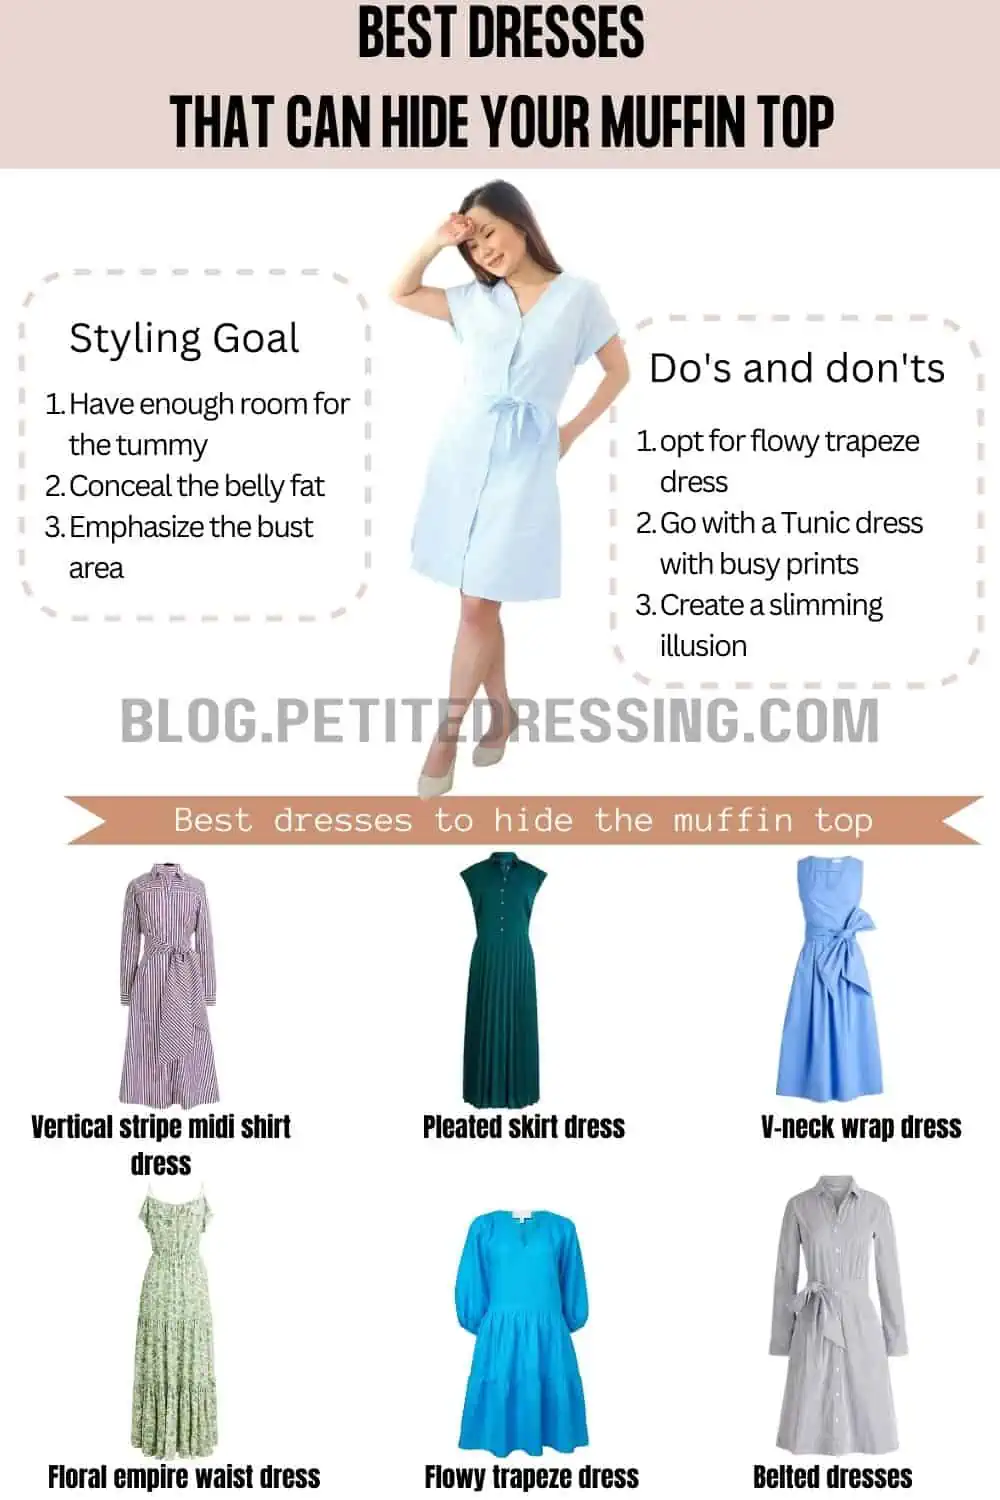 https://blog.petitedressing.com/wp-content/uploads/2022/12/What-style-dresses-can-hide-a-muffin-top.webp